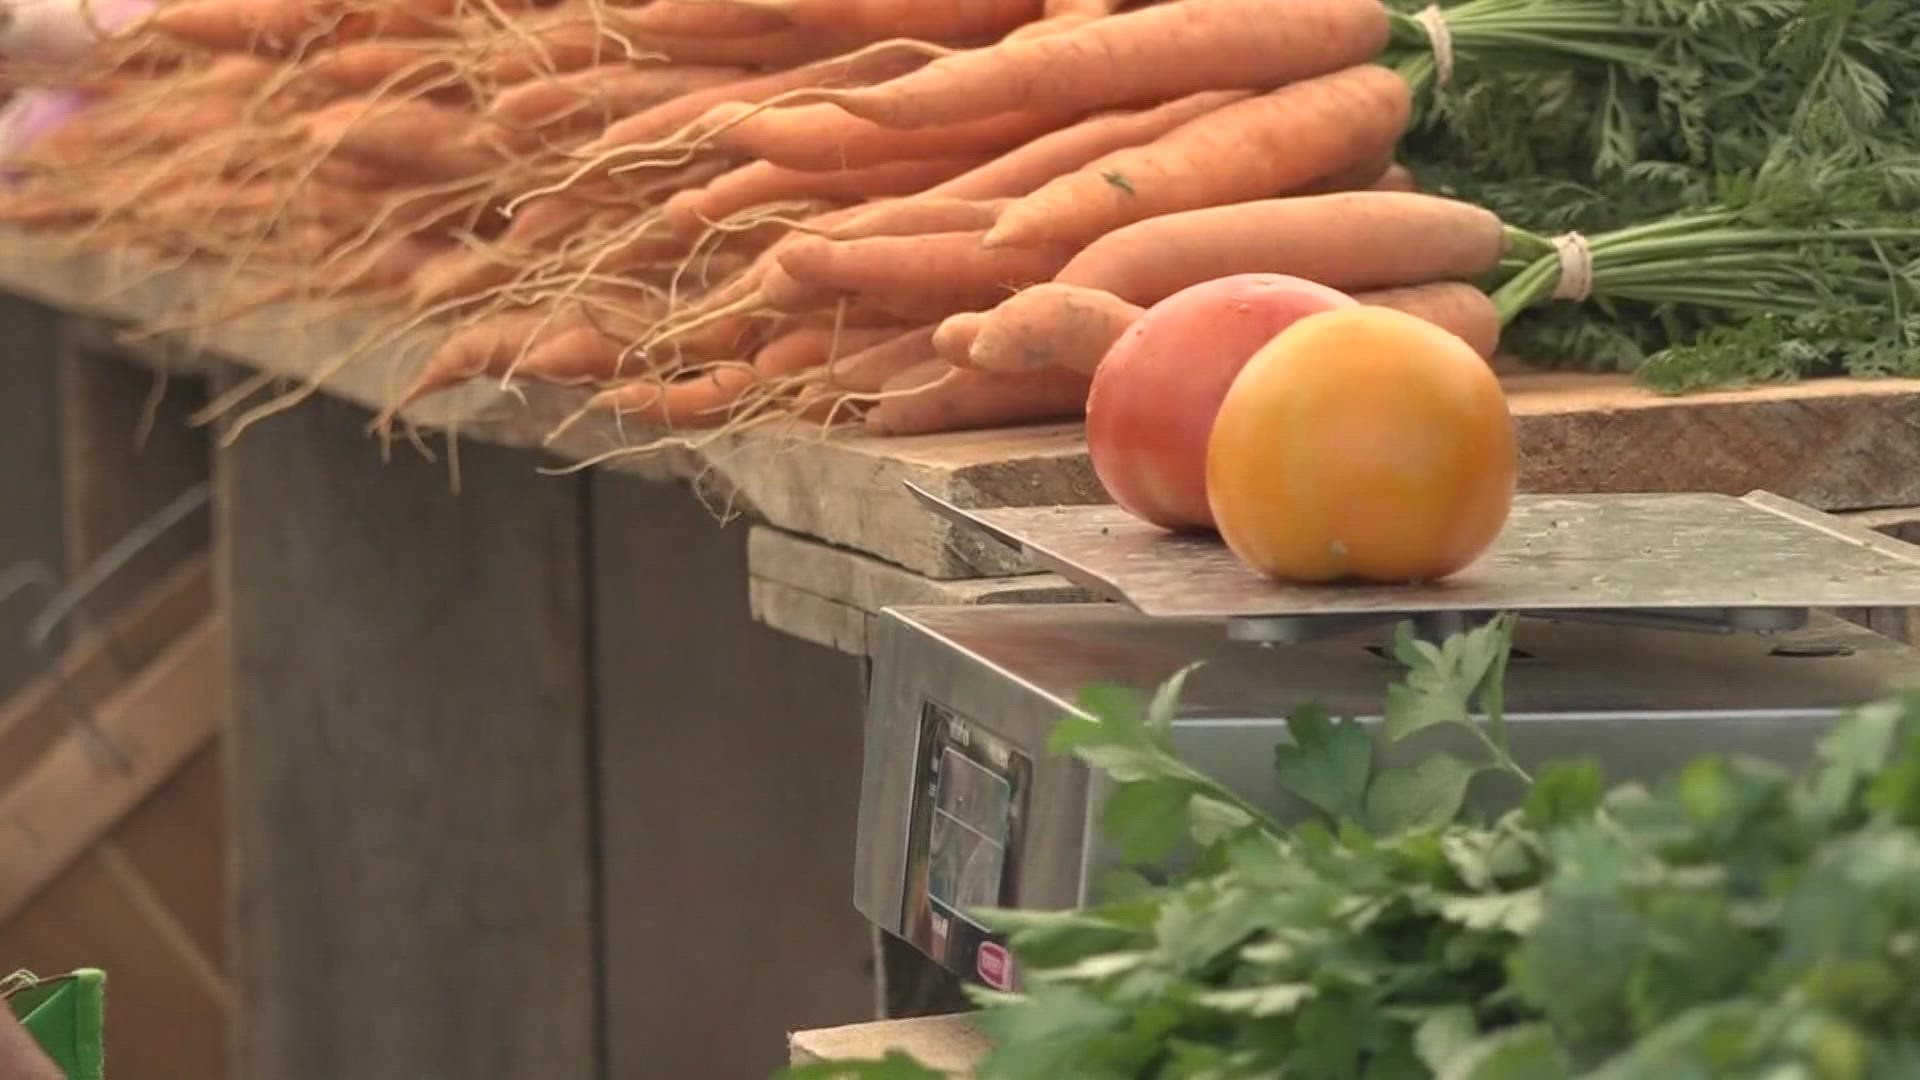 The Executive Director of the Maine Federation of Farmers' Markets says it estimates farmers' markets contribute almost $20 million to Maine's economy.